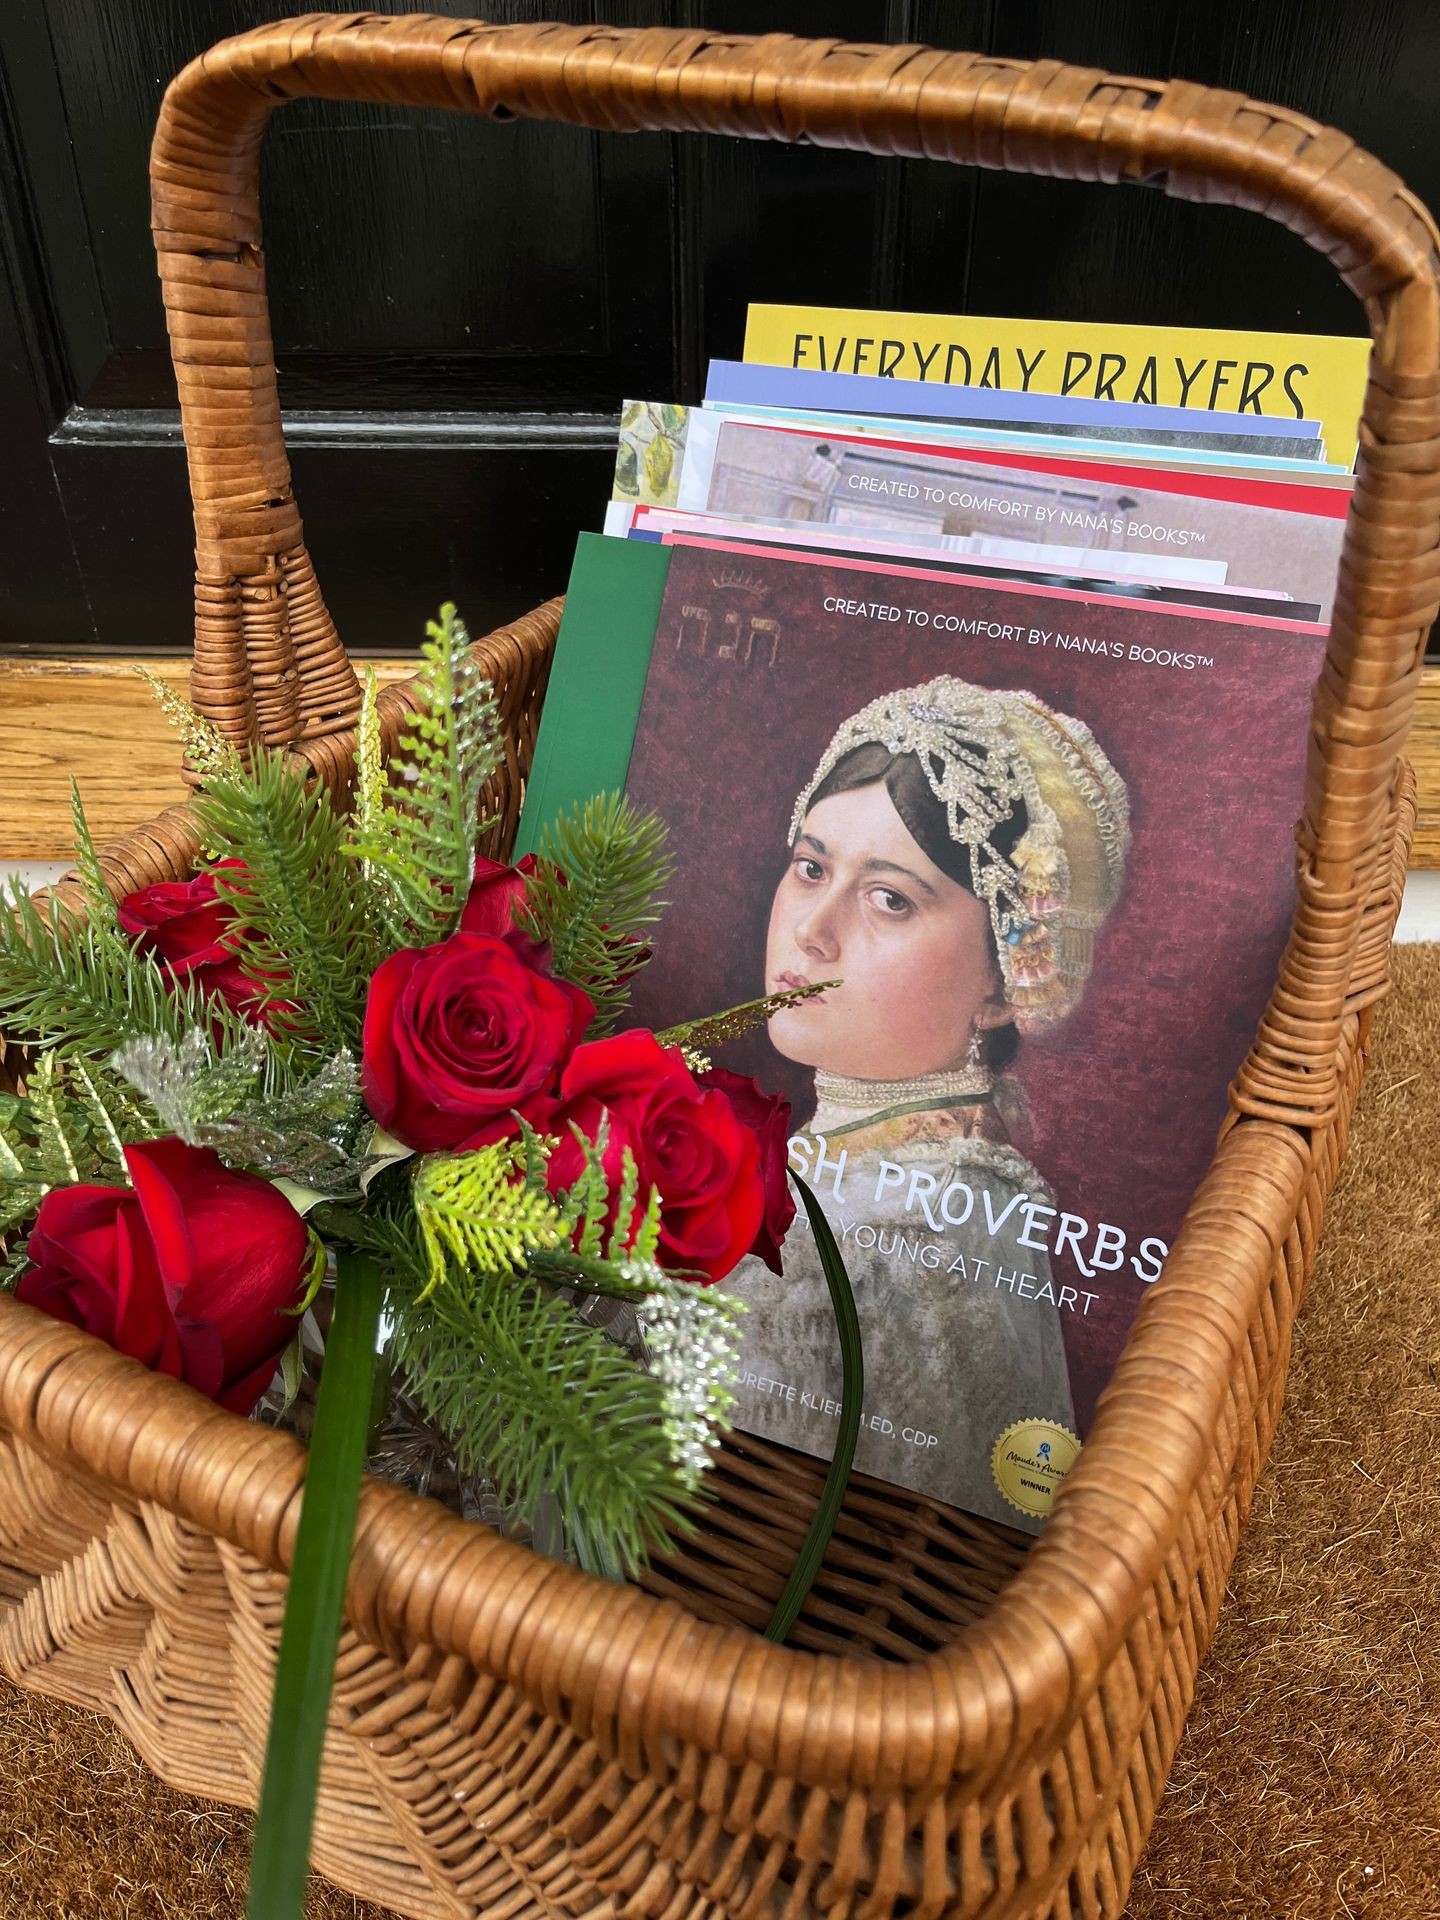 This is a basket of NANA’S BOOKS, designed for people living with dementia. the first book in front is a book of Jewish Proverbs and there is a round cut crystal bowl full of red tea roses in the basket to bring on connected visits. NANA’S BOOKS are faith-based and many have a spiritual focus.